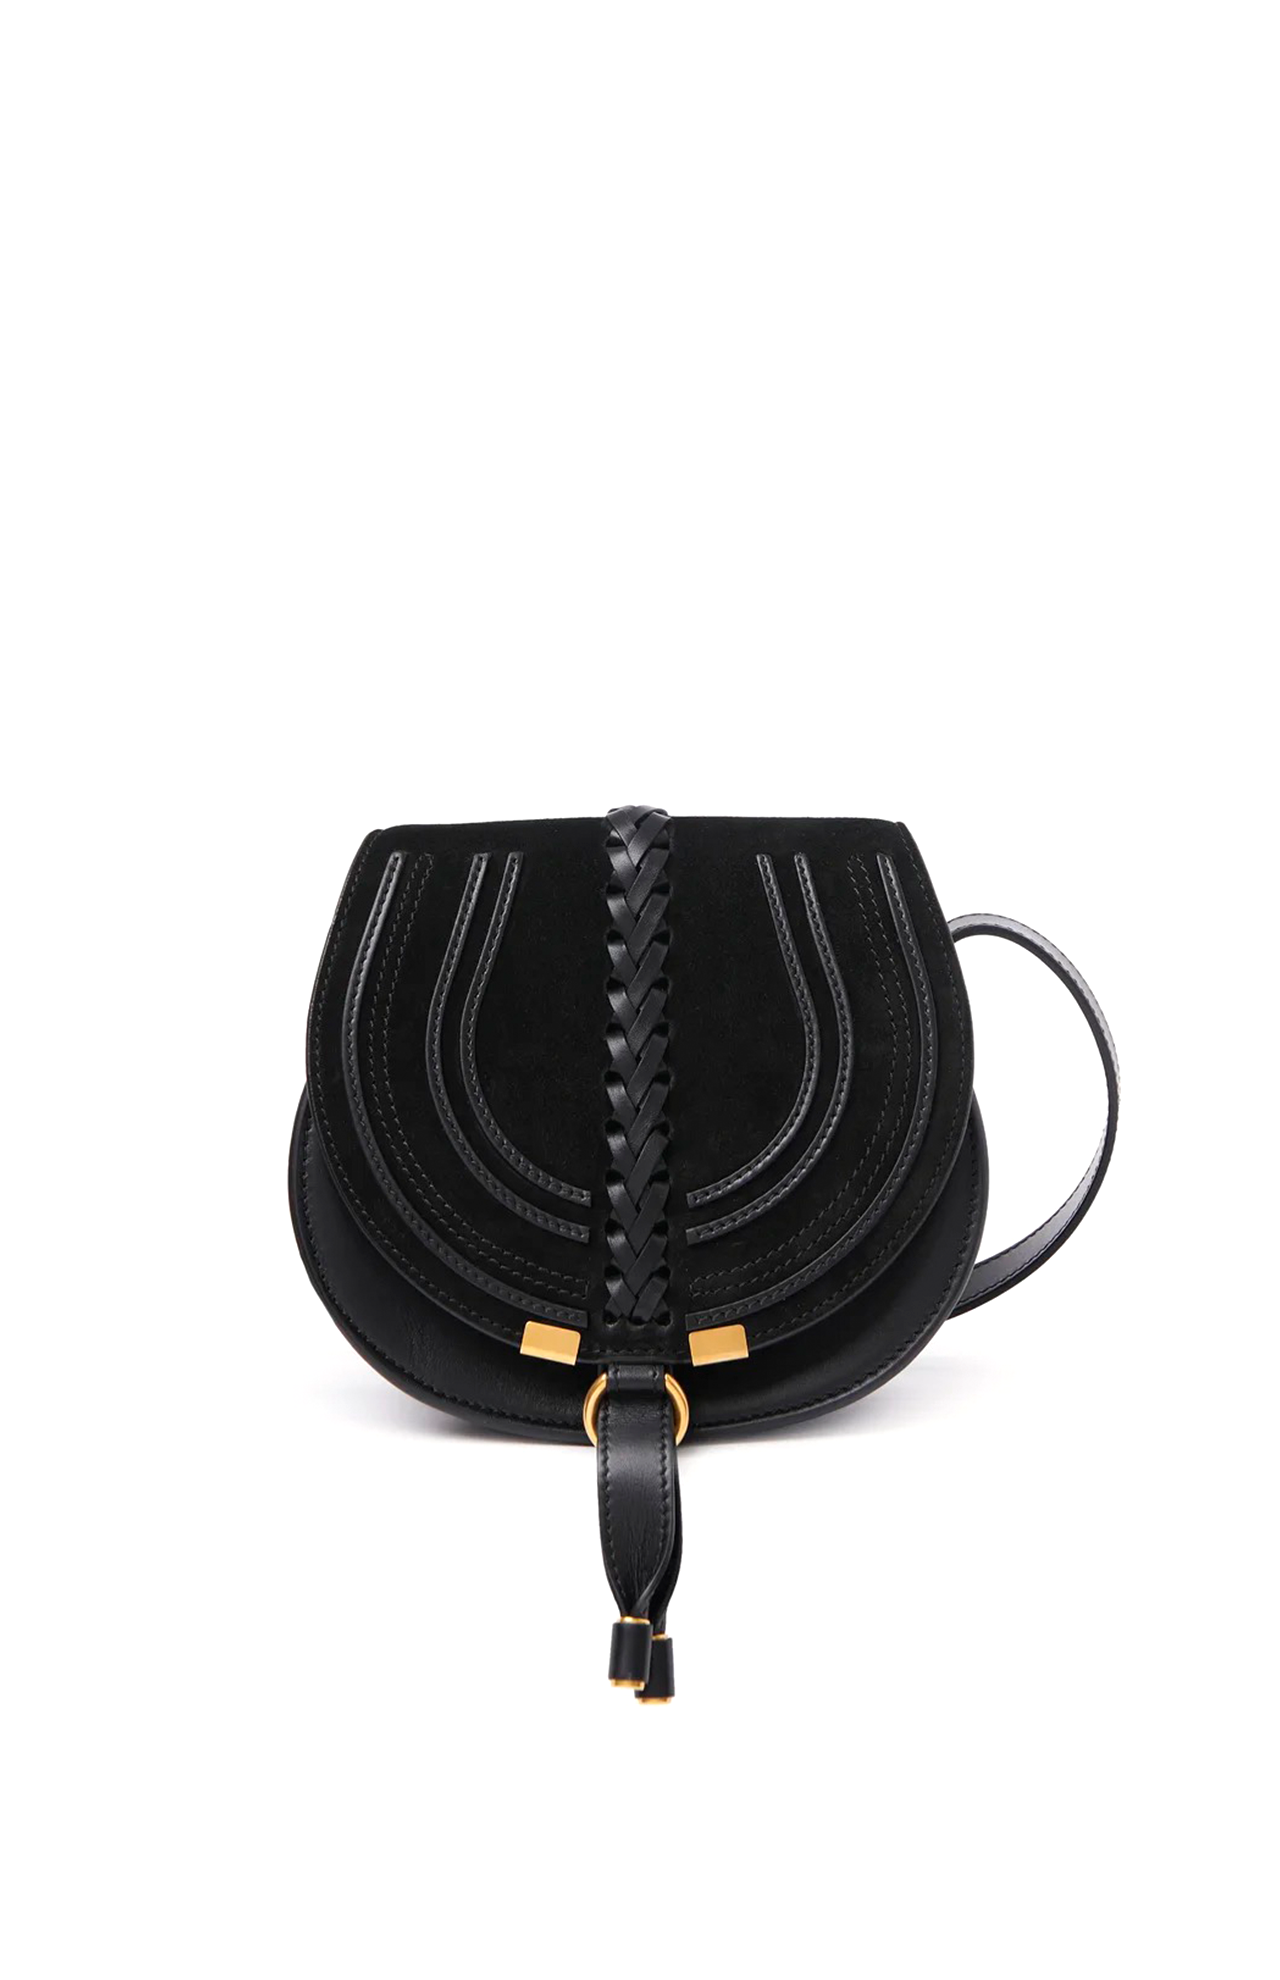 Chloé Women's Small Marcie Suede & Leather Saddle Bag - Black